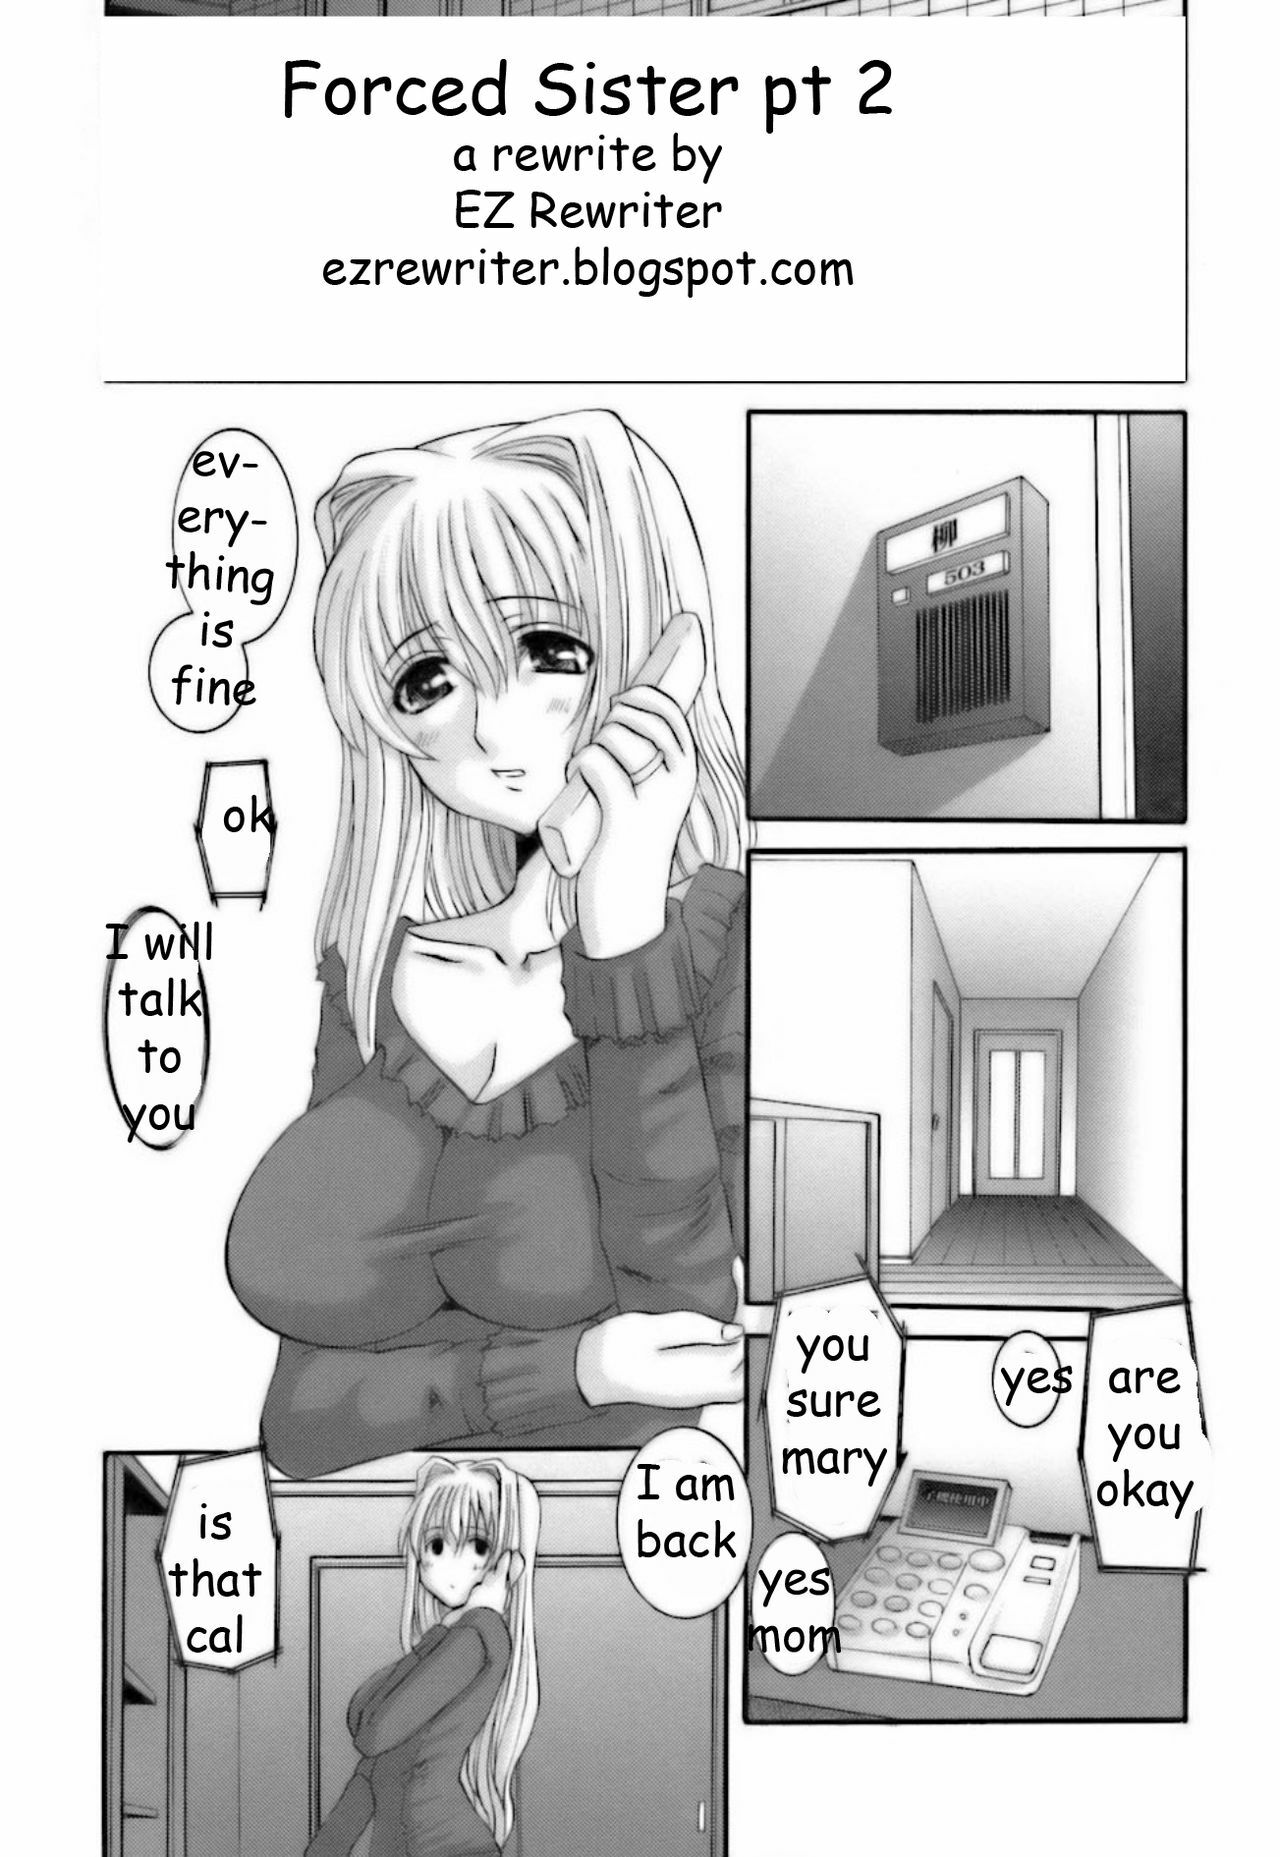 Forced Sister 1-2 [English] [Rewrite] [EZ Rewriter] page 17 full